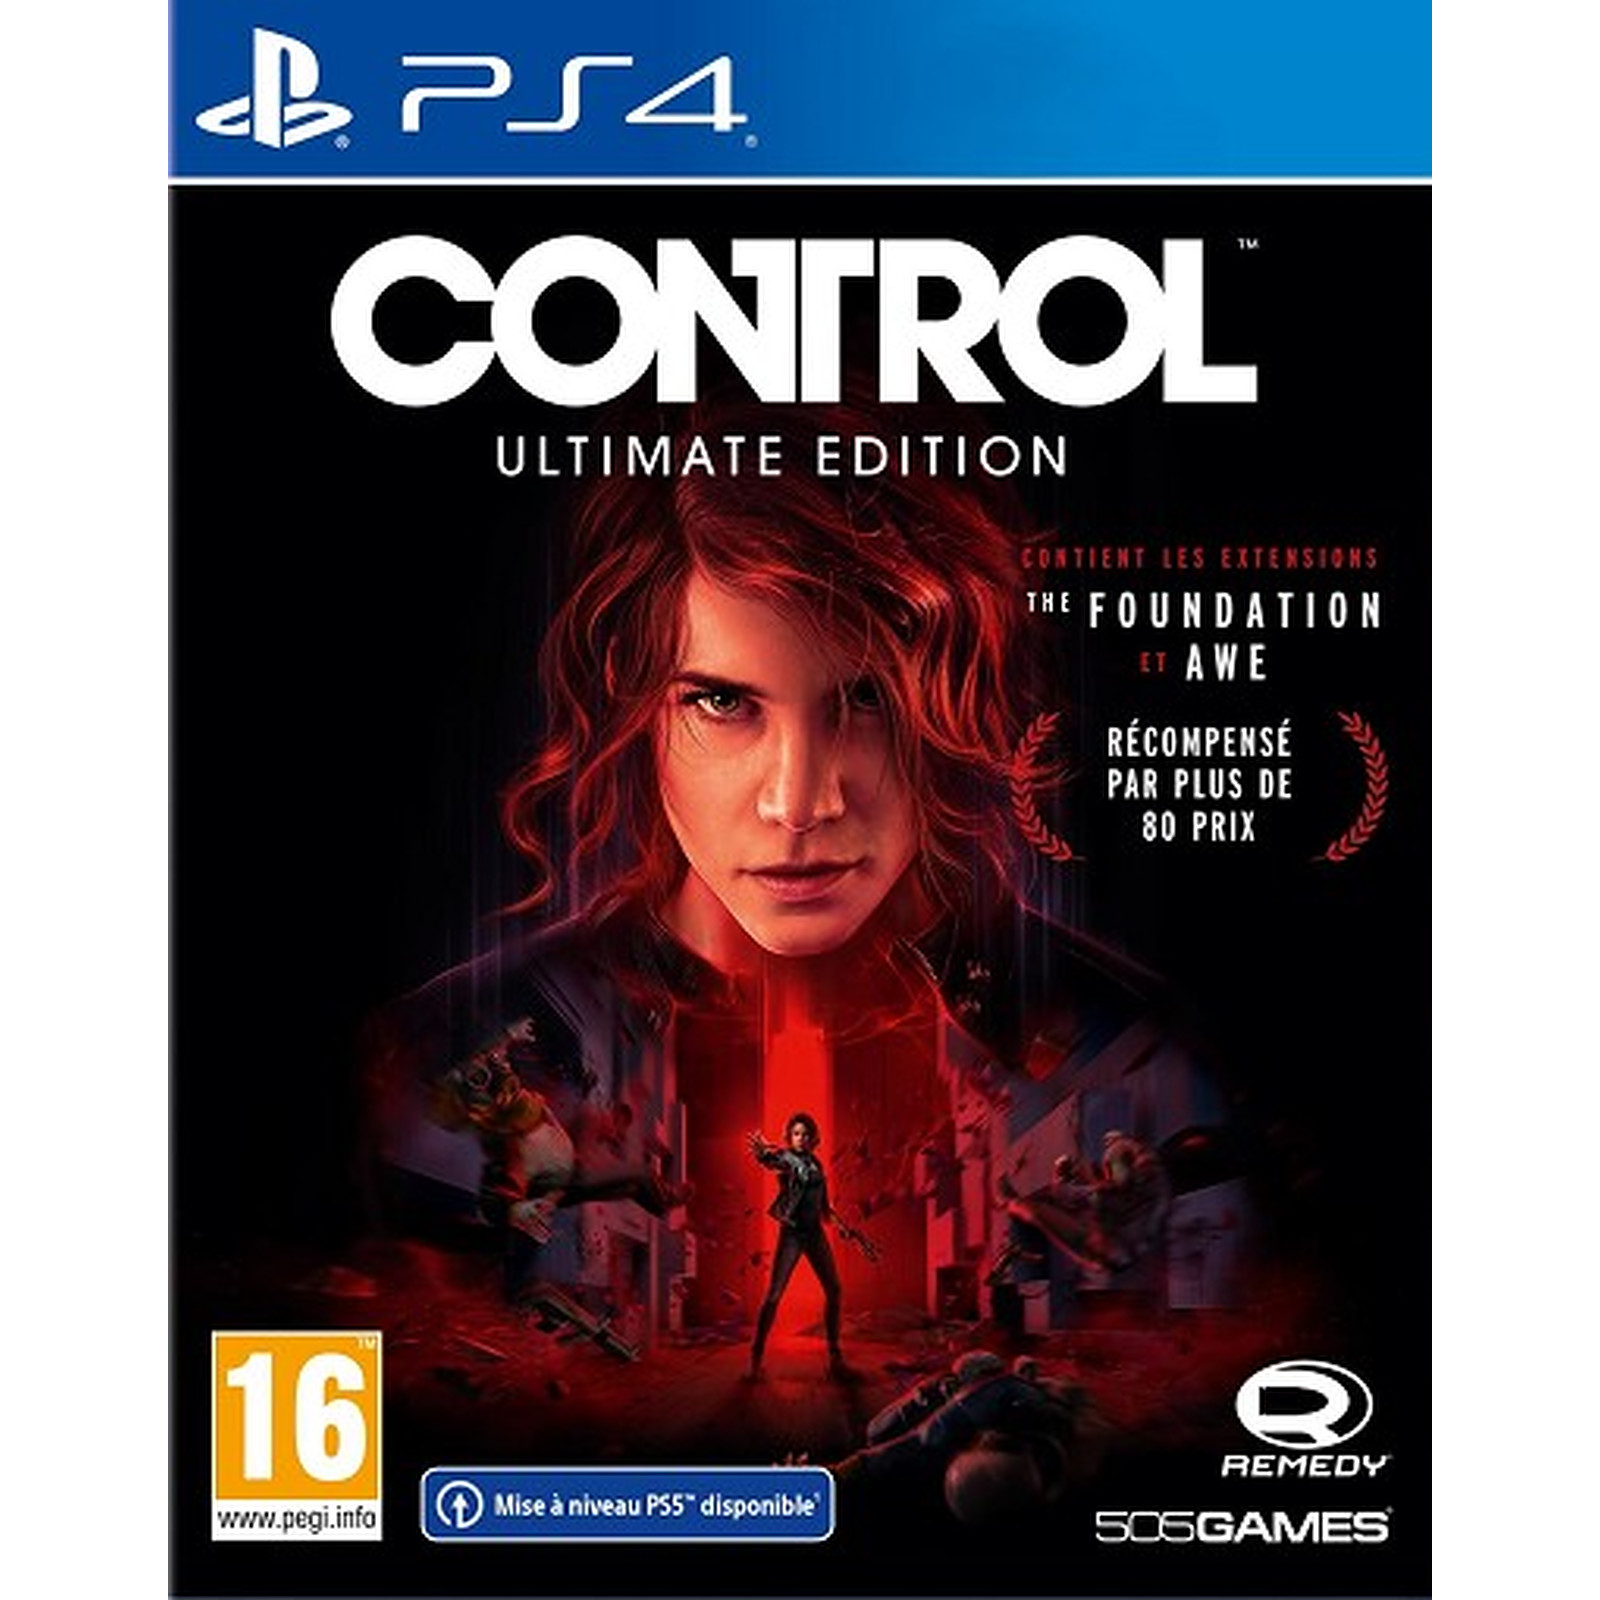 Control Ultimate Edition (PS4) - Jeux PS4 505 Games